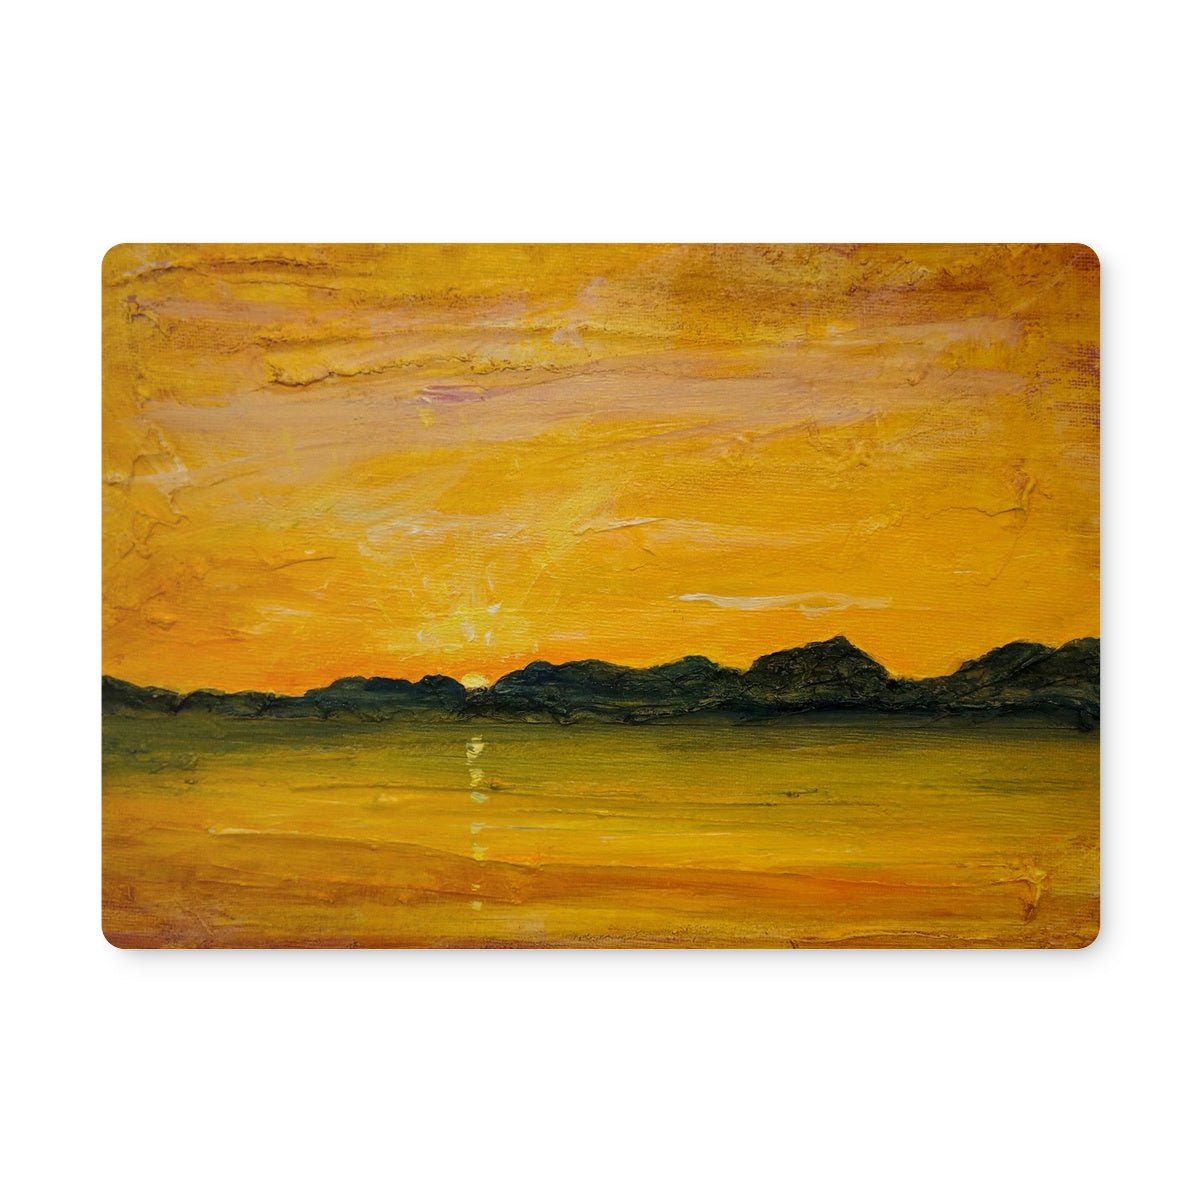 Jura Sunset Art Gifts Placemat-Placemats-Hebridean Islands Art Gallery-Single Placemat-Paintings, Prints, Homeware, Art Gifts From Scotland By Scottish Artist Kevin Hunter